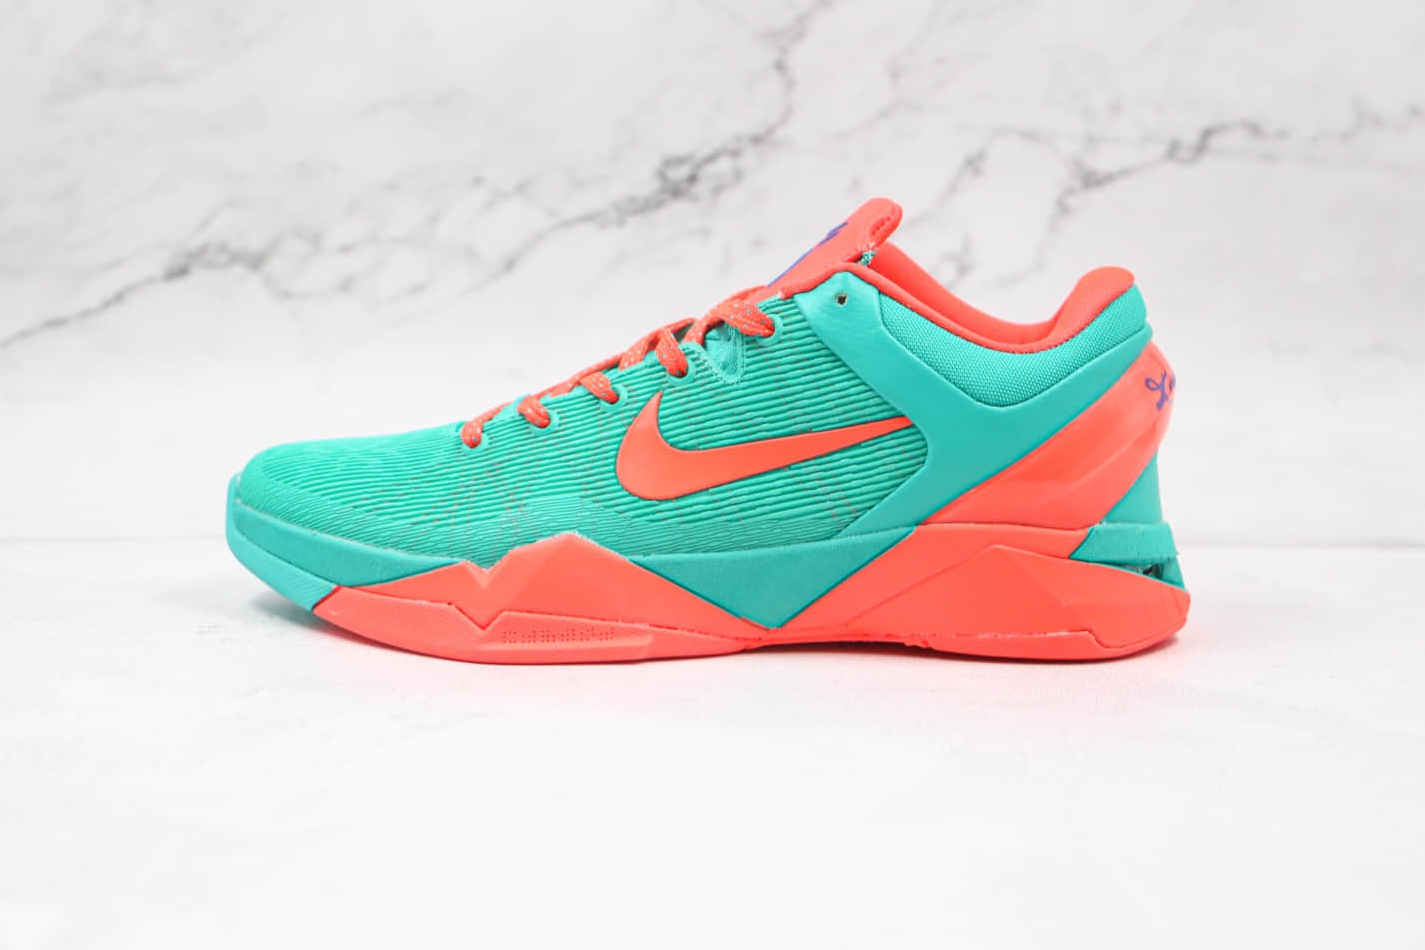 Nike Zoom Kobe 7 System 'Barcelona Home' 488371-301 - Stylish and High-Performing Basketball Sneakers